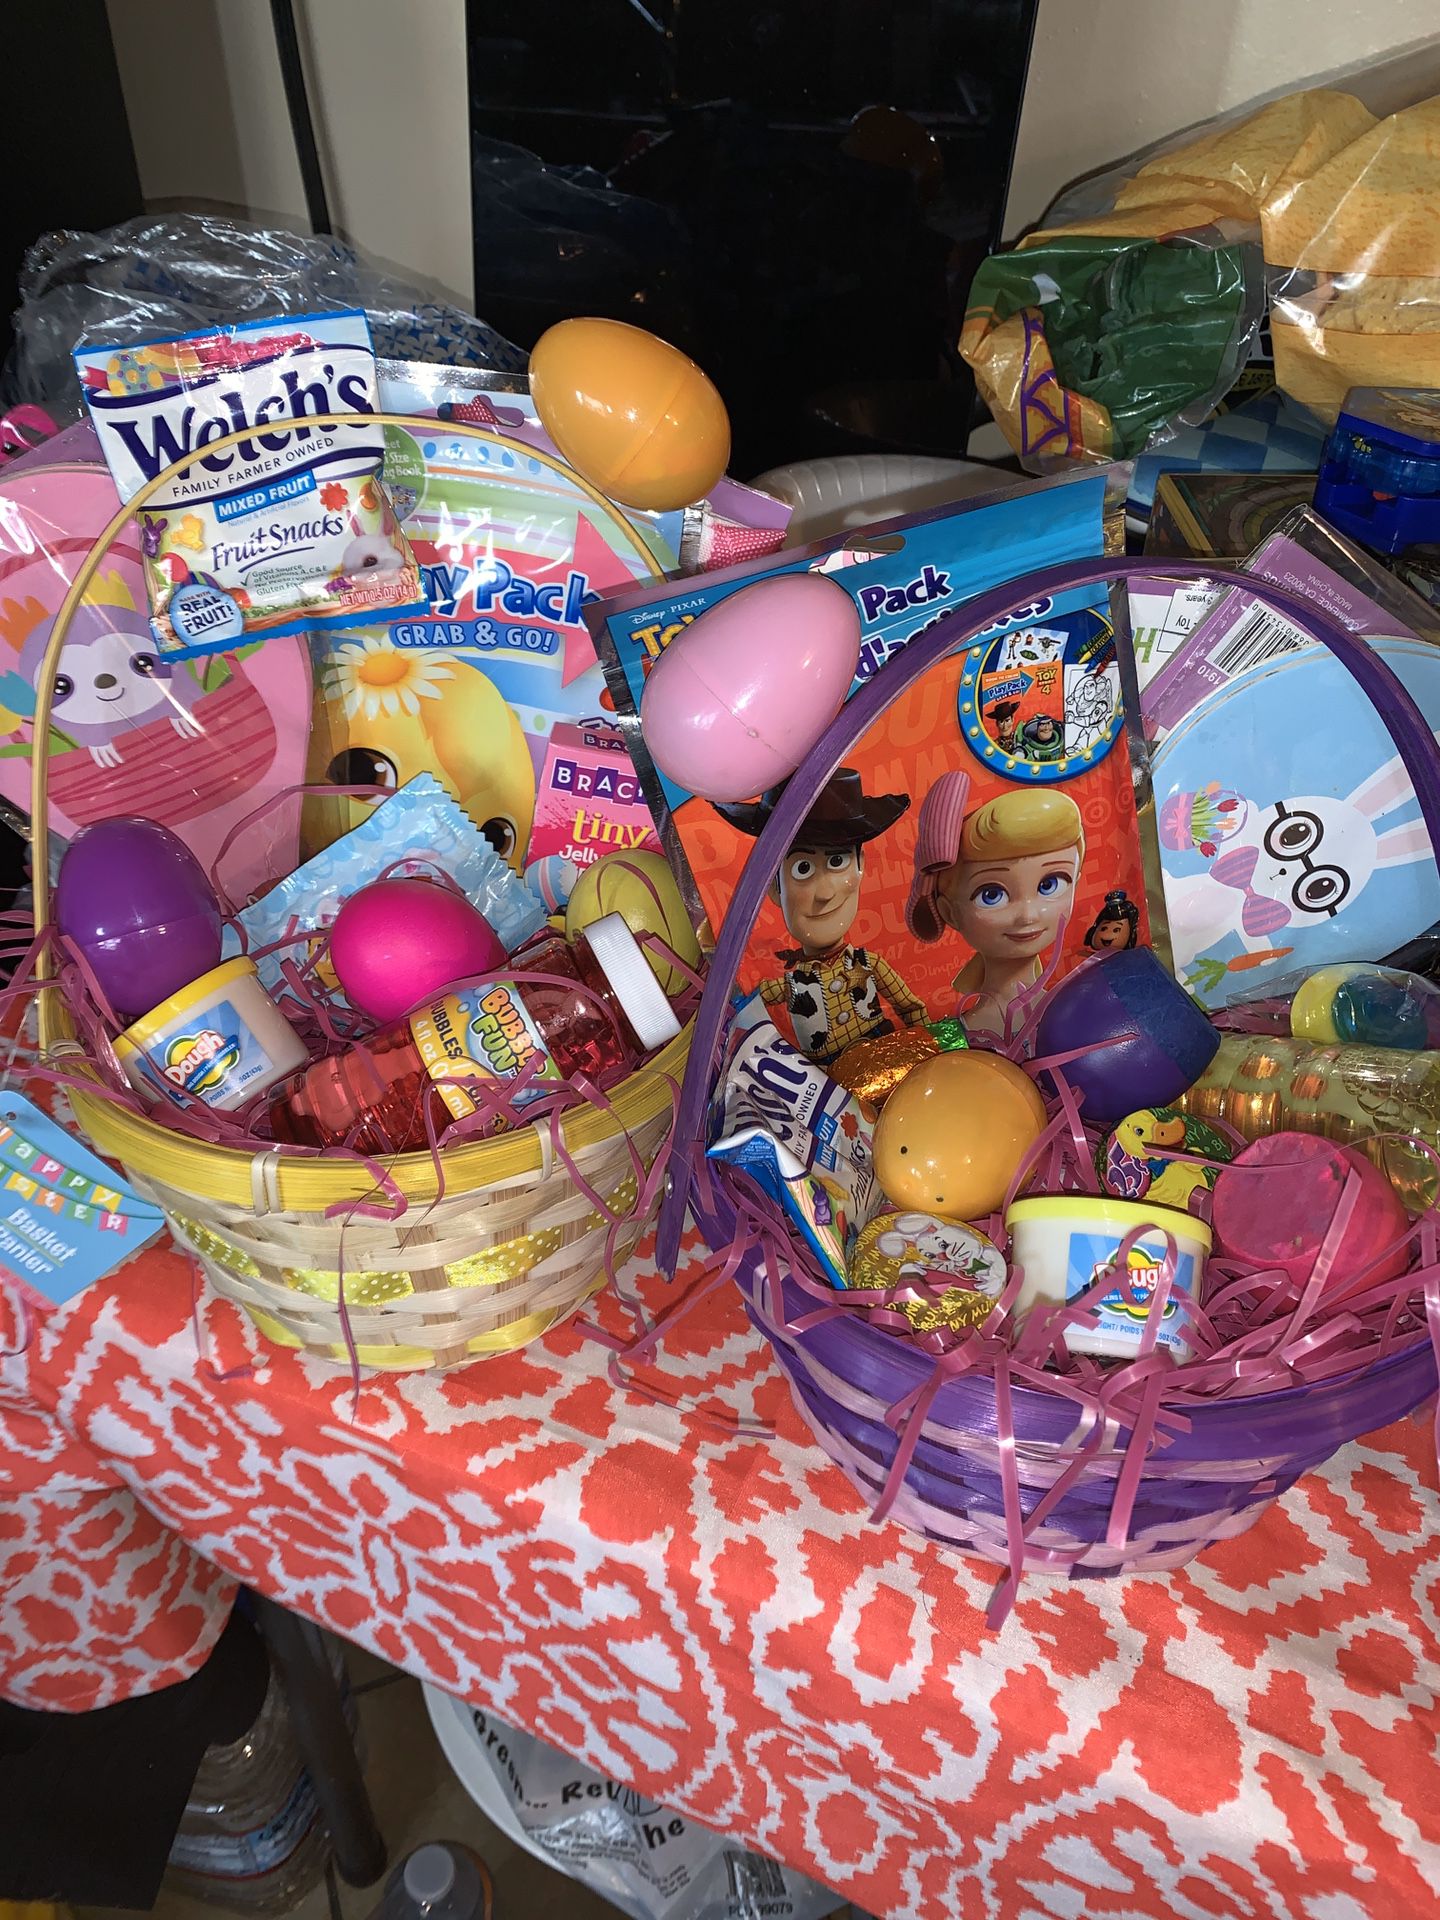 Easter is this Sunday...get your baskets